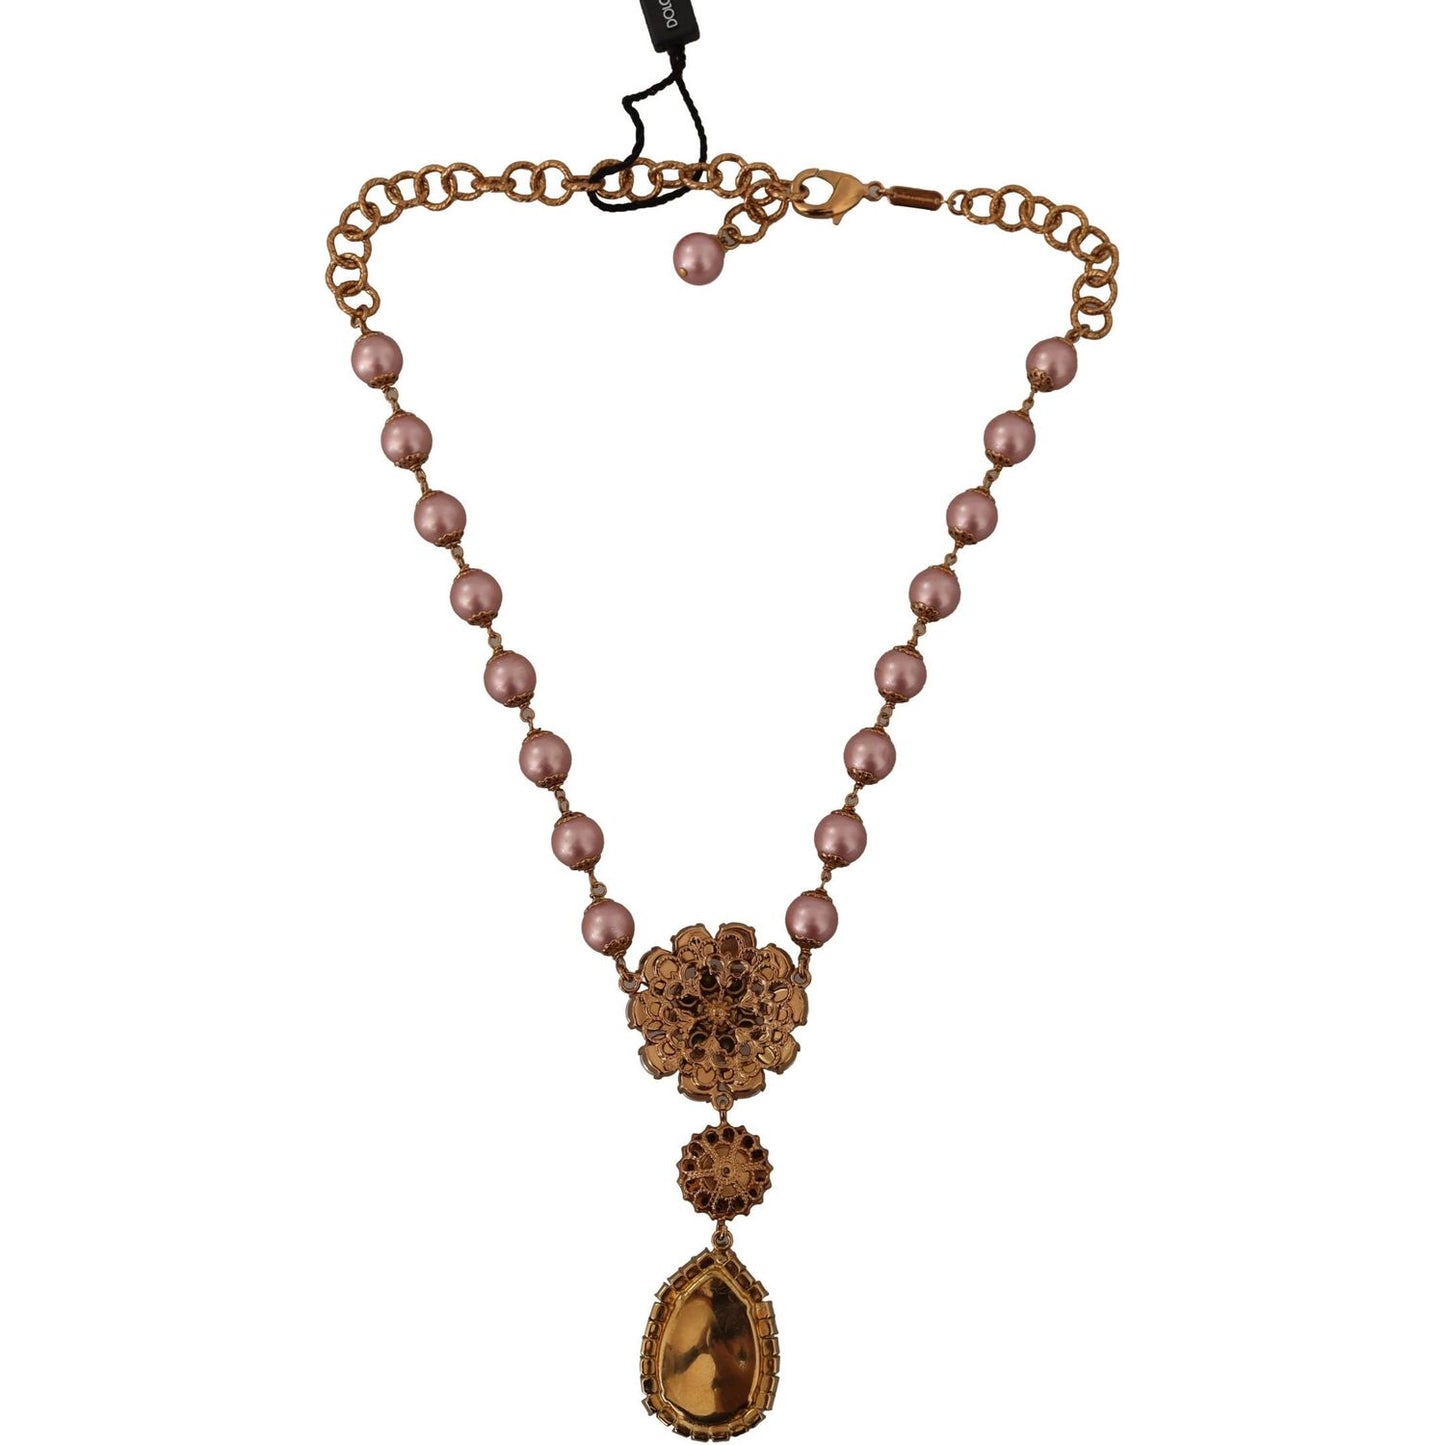 Dolce & Gabbana Elegant Gold Tone Faux Pearl Charm Necklace gold-tone-brass-pink-beaded-pearls-crystal-pendant-necklace WOMAN NECKLACE IMG_8761-scaled-3f0b5e3f-804.jpg